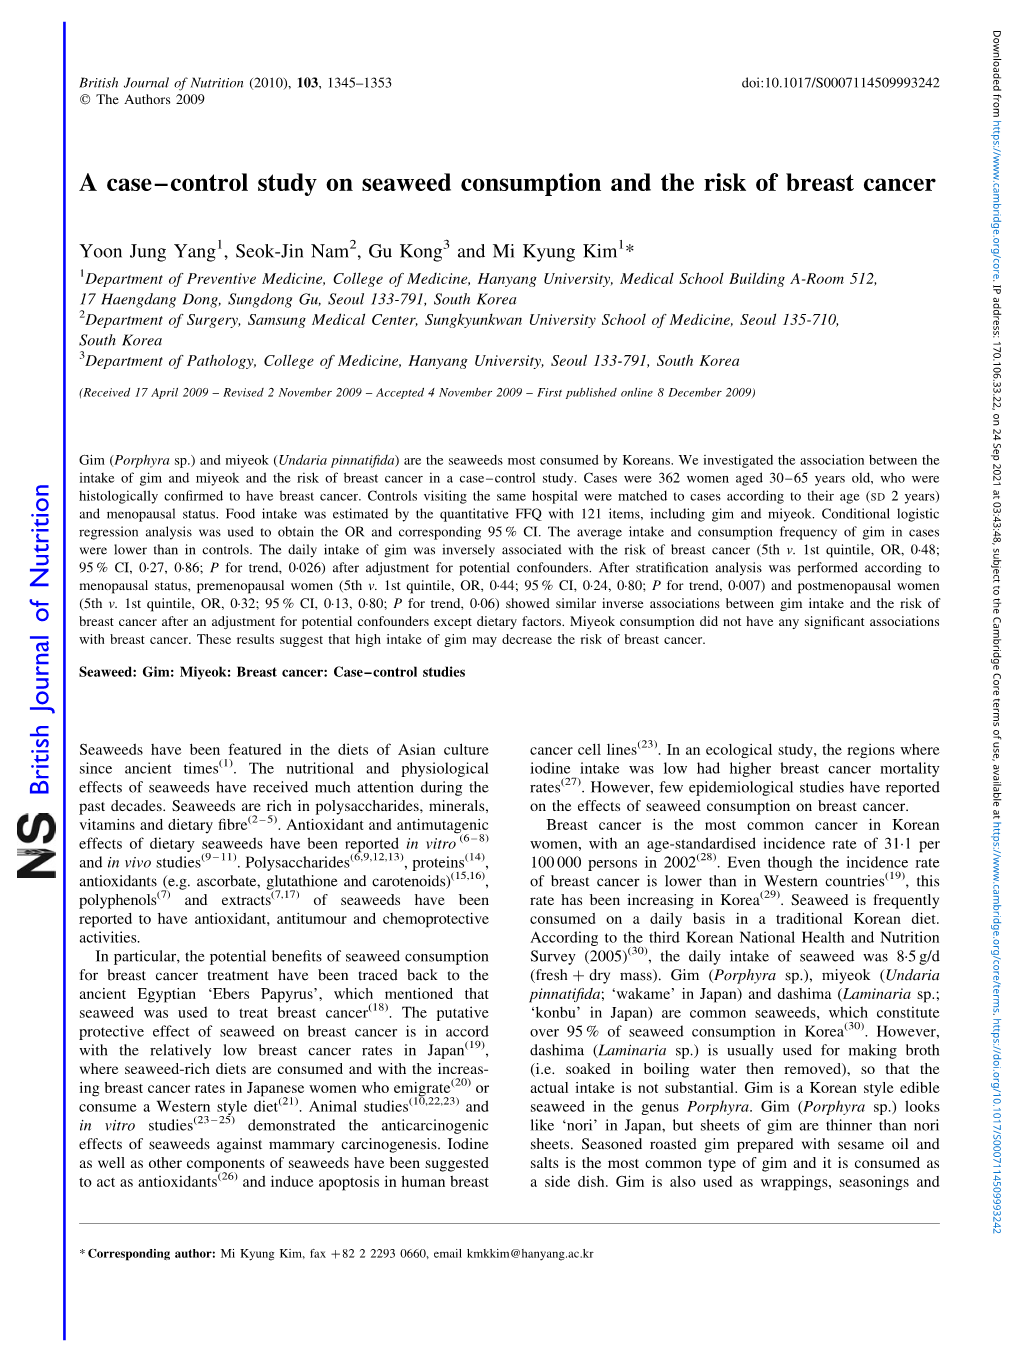 A Case–Control Study on Seaweed Consumption and the Risk of Breast Cancer